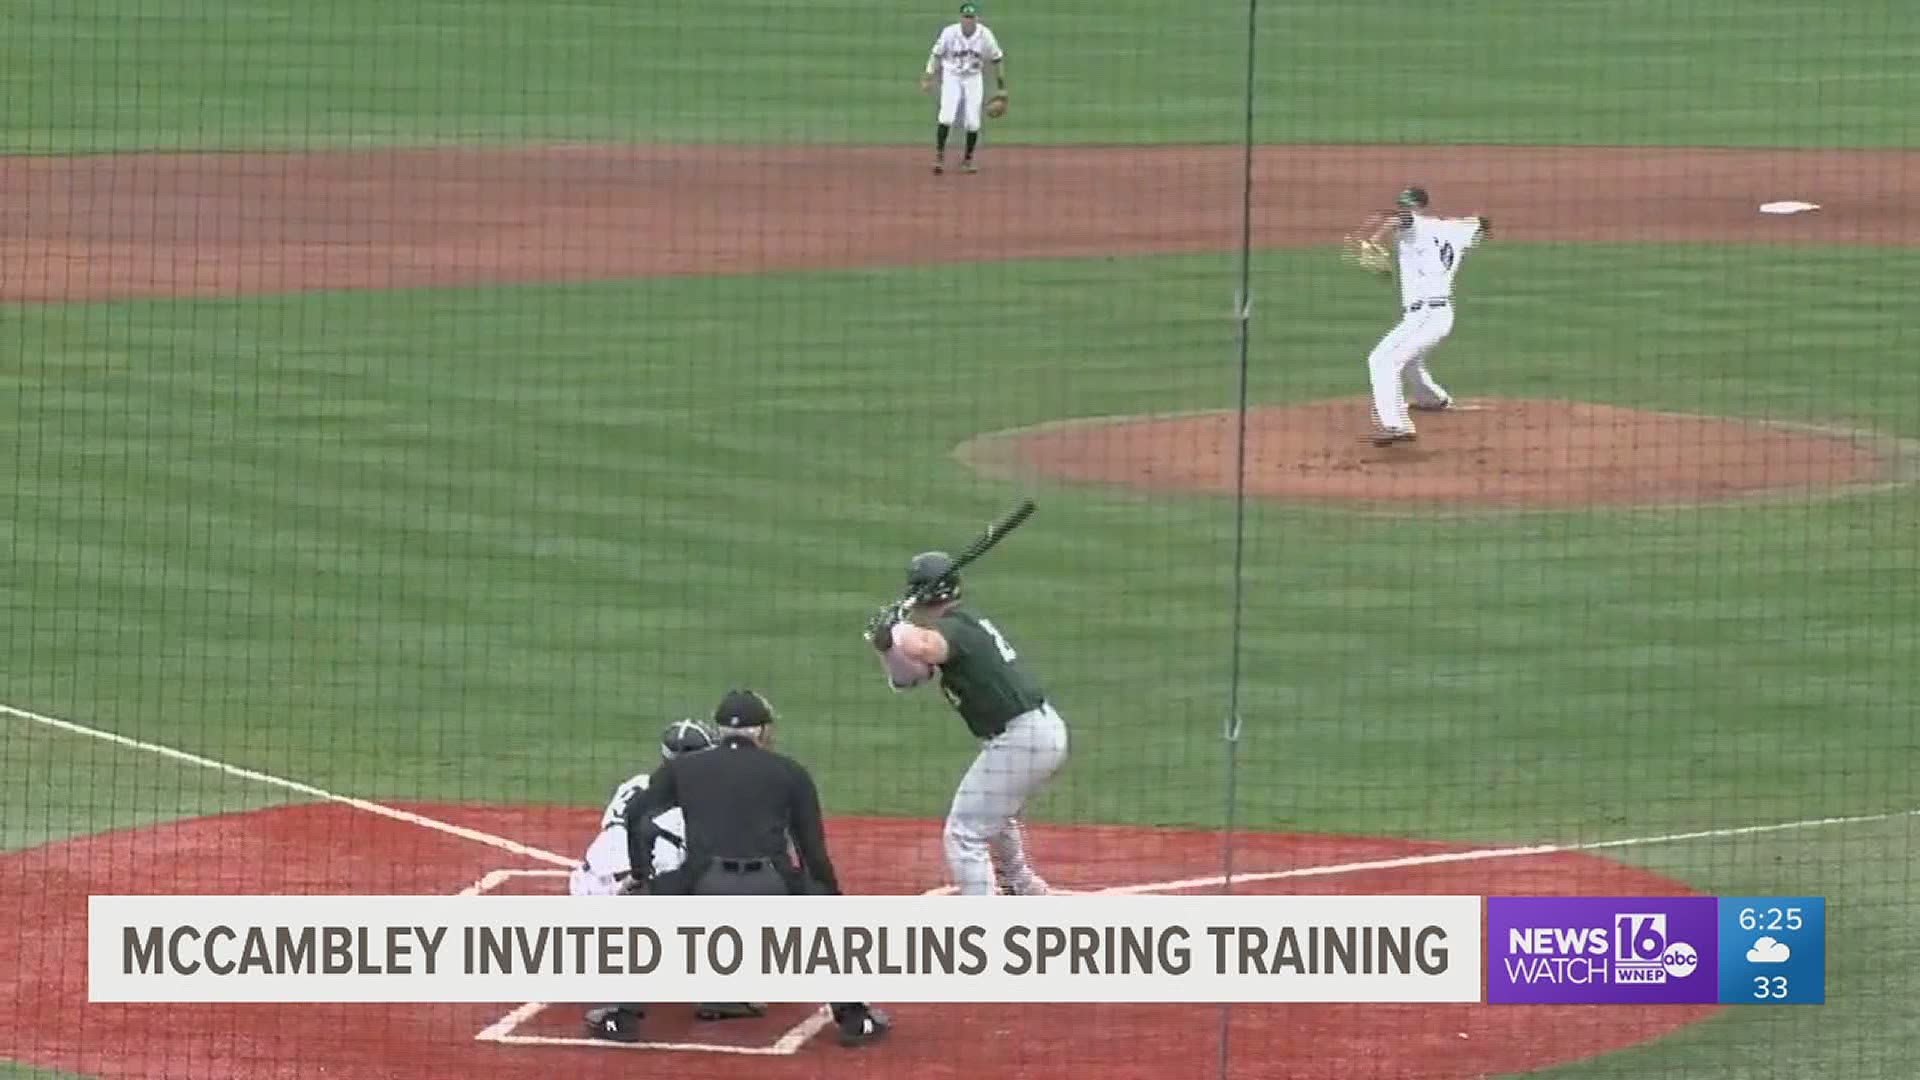 Zach McCambley Invited to Marlins Spring Training